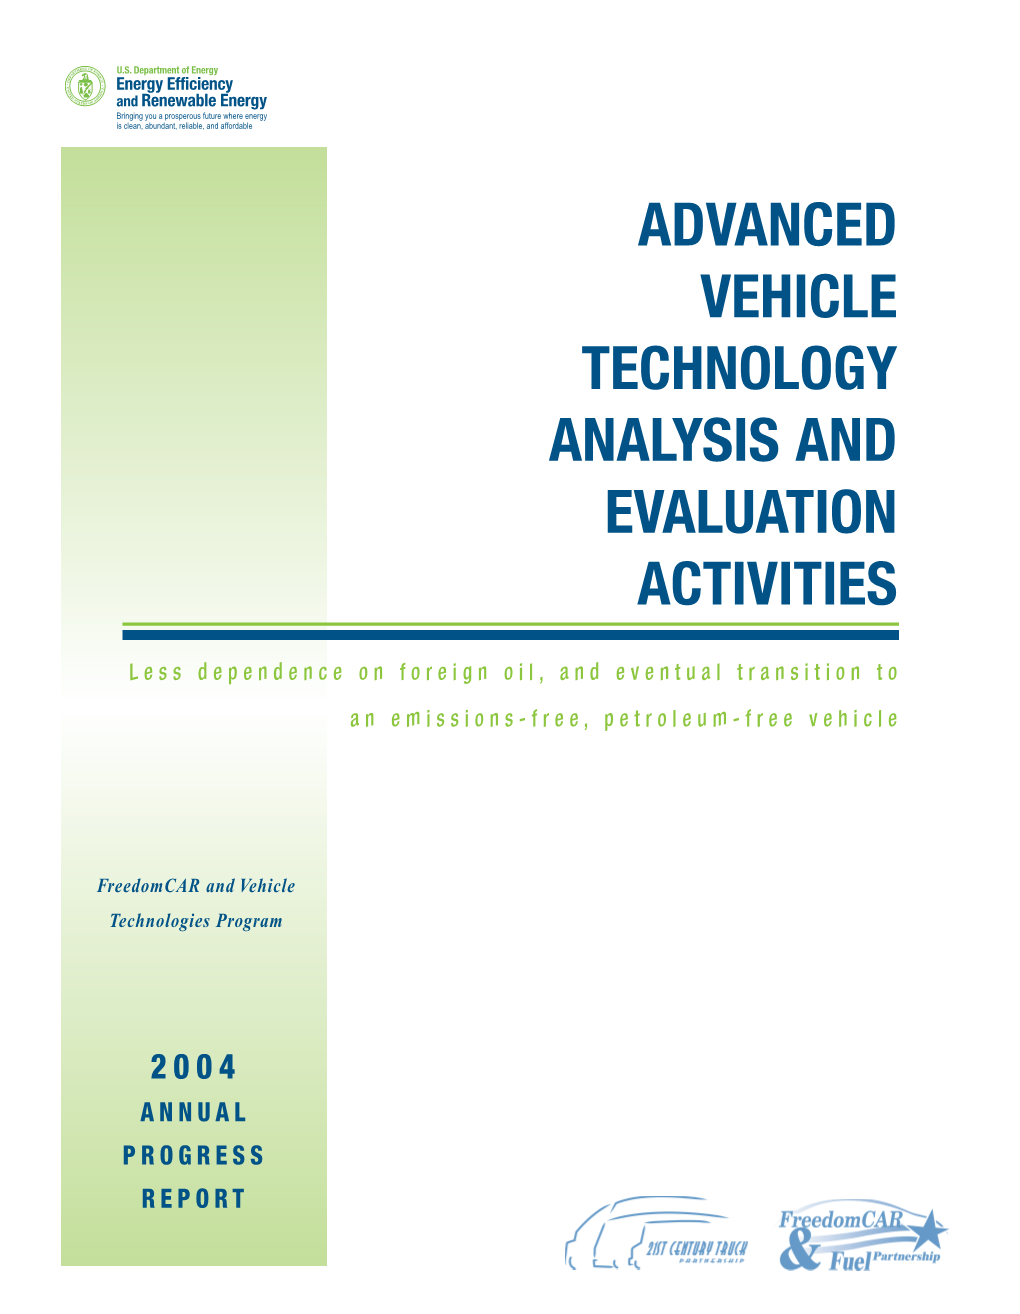 Annual Progress Report for Advanced Vehicle Technology Analysis and Evaluation Activities